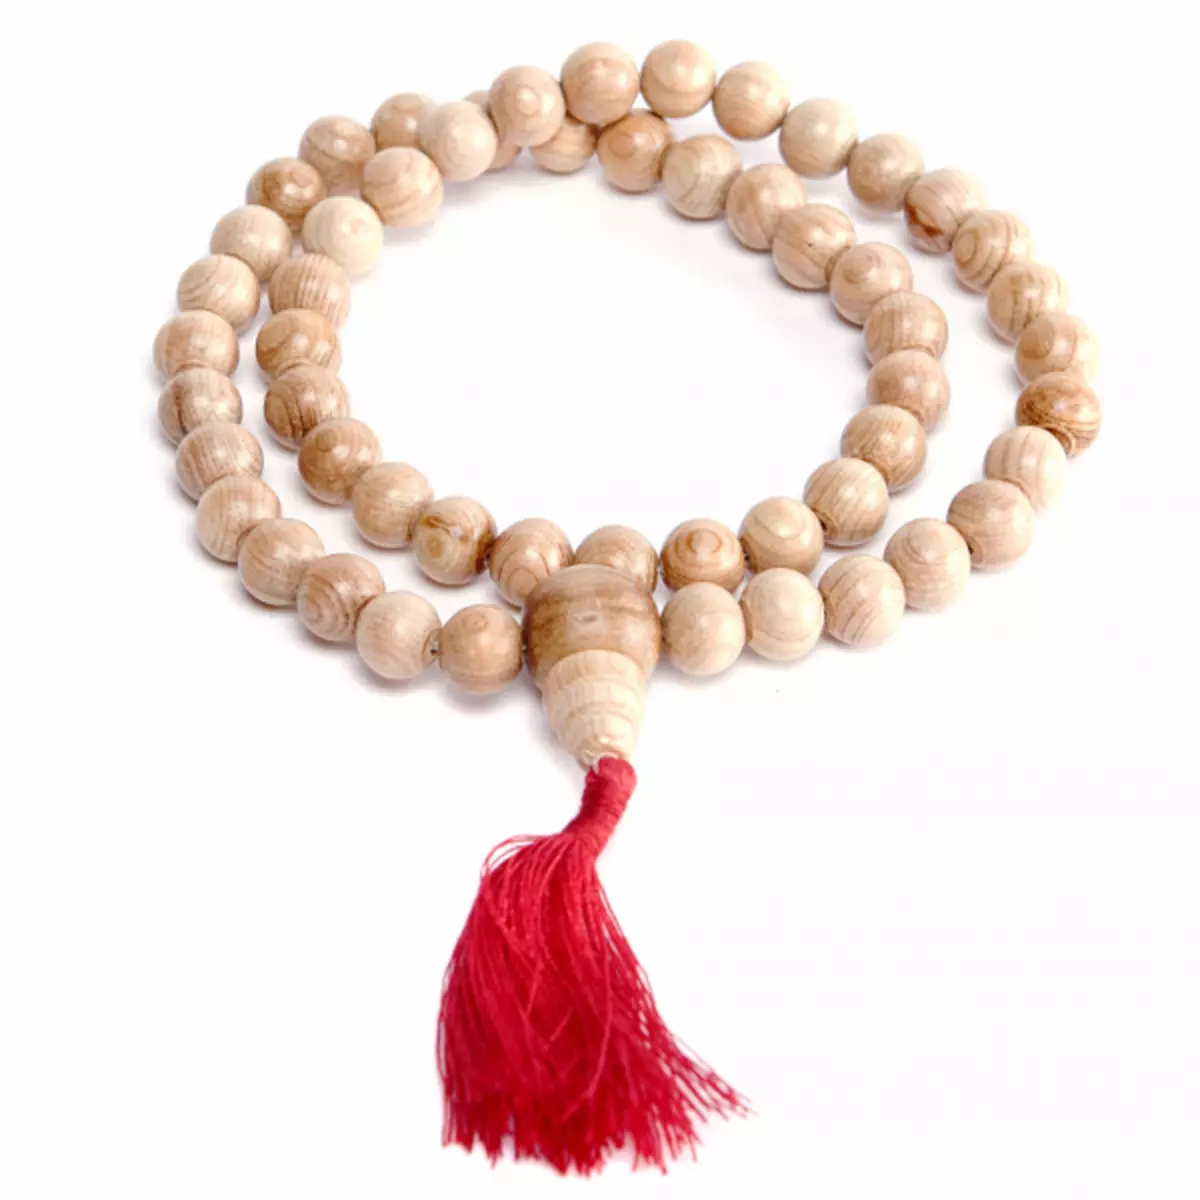 Buddhist rosary do it yourself on hand with photos and videos